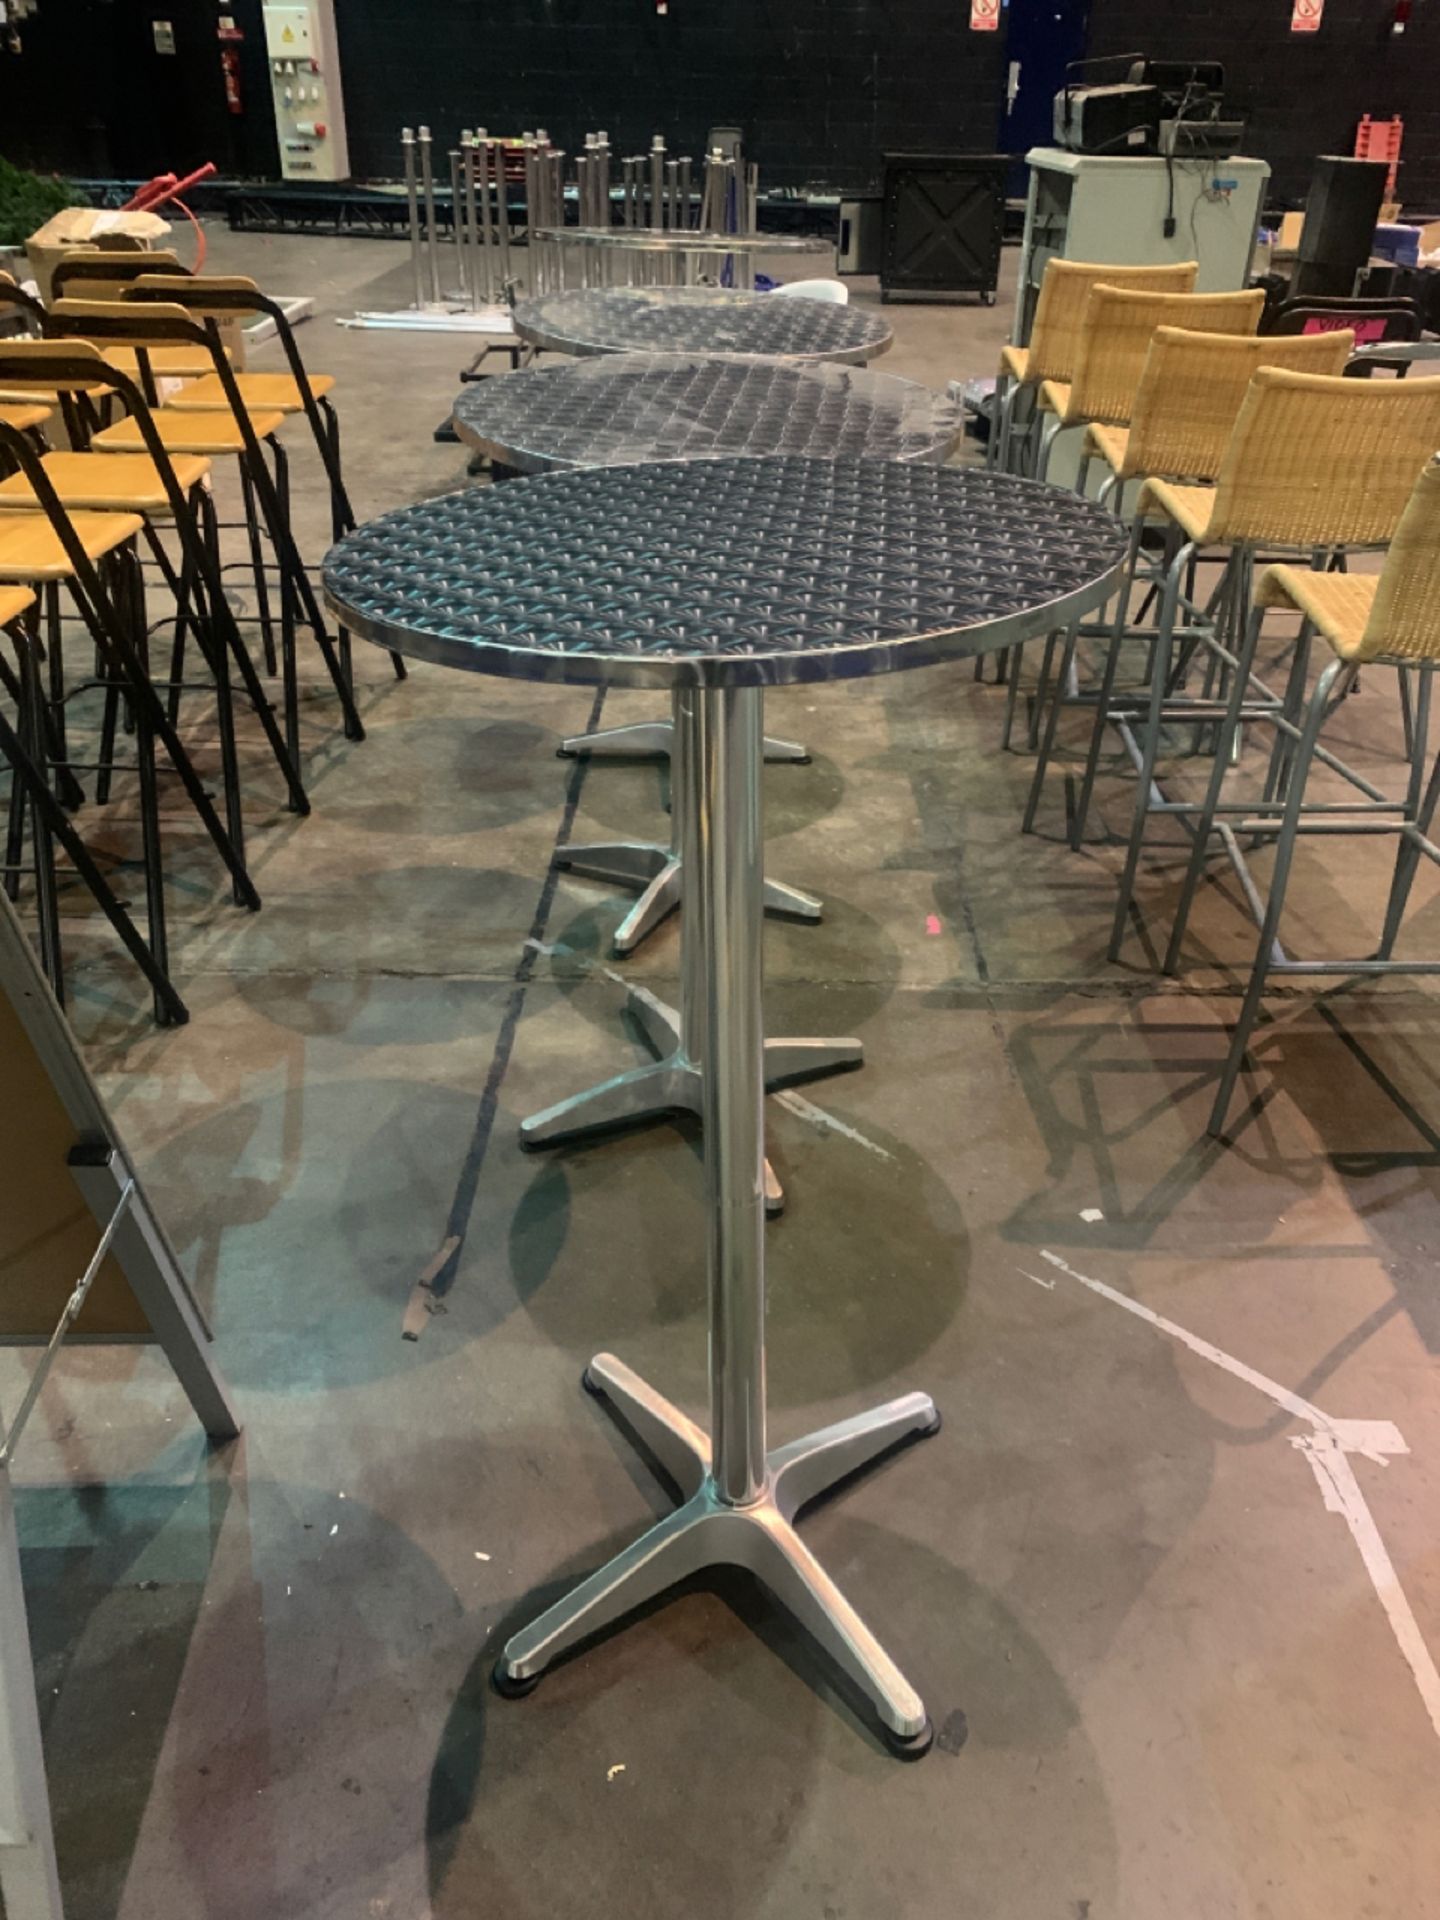 Set of 4 Matching Round Bar Tables - Image 2 of 2